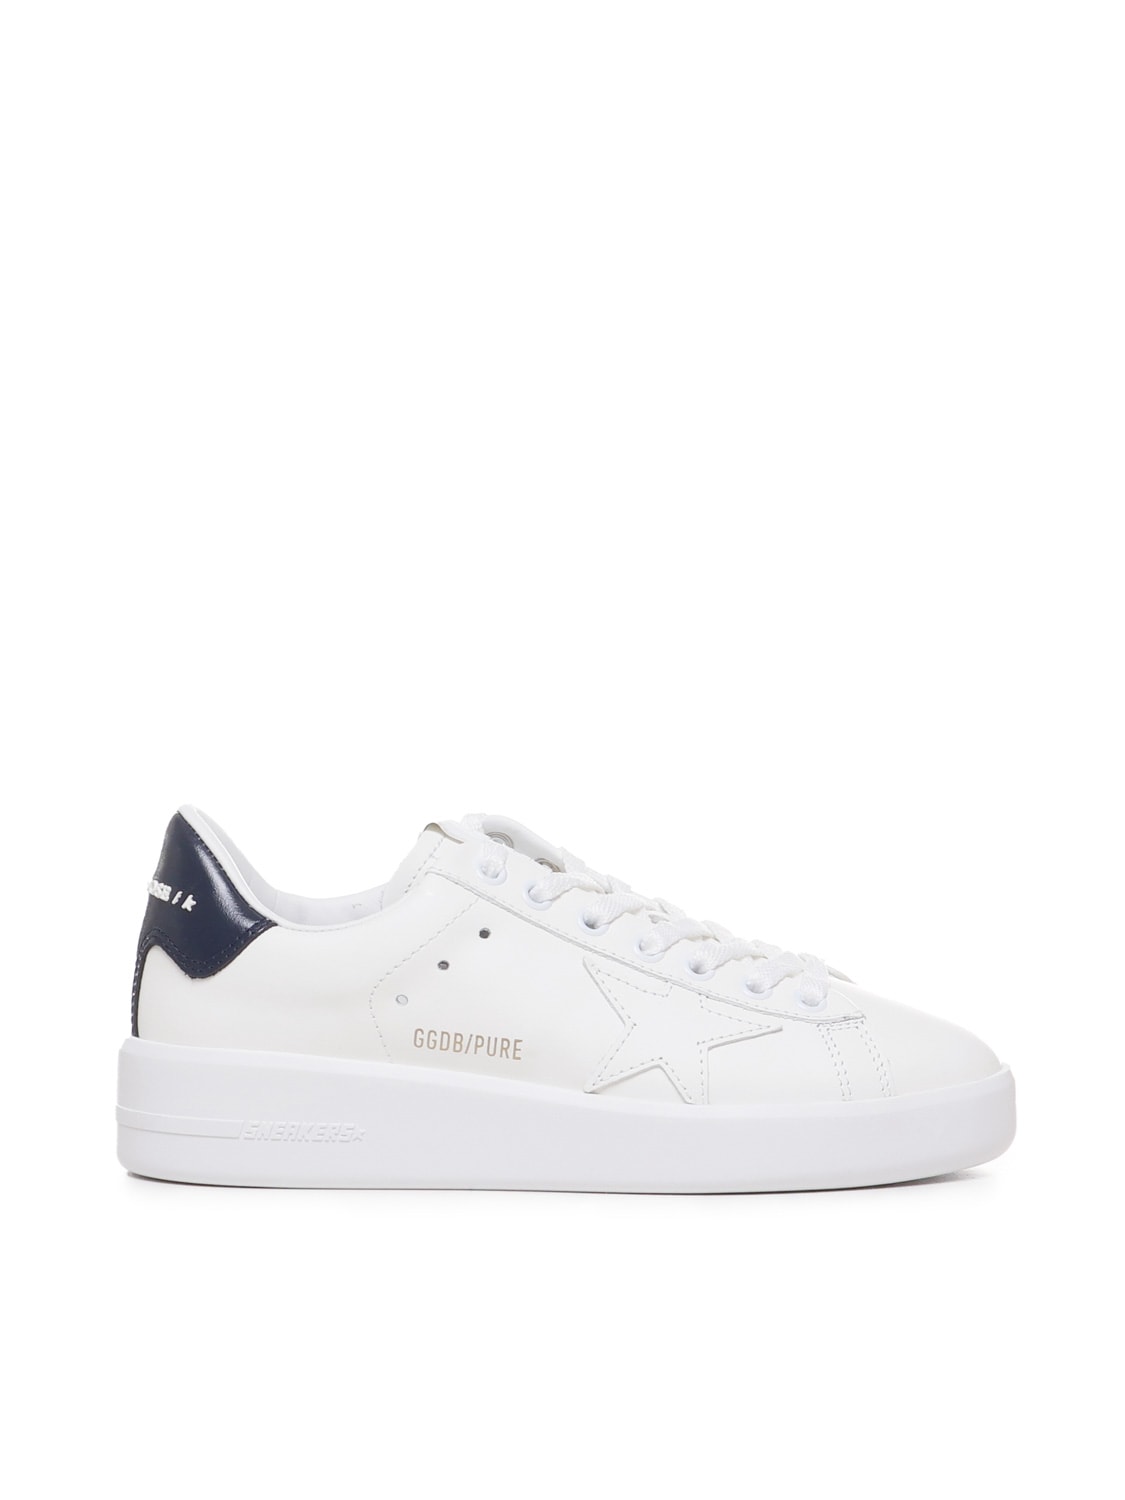 Golden Goose Pure Star Sneakers In White/blue